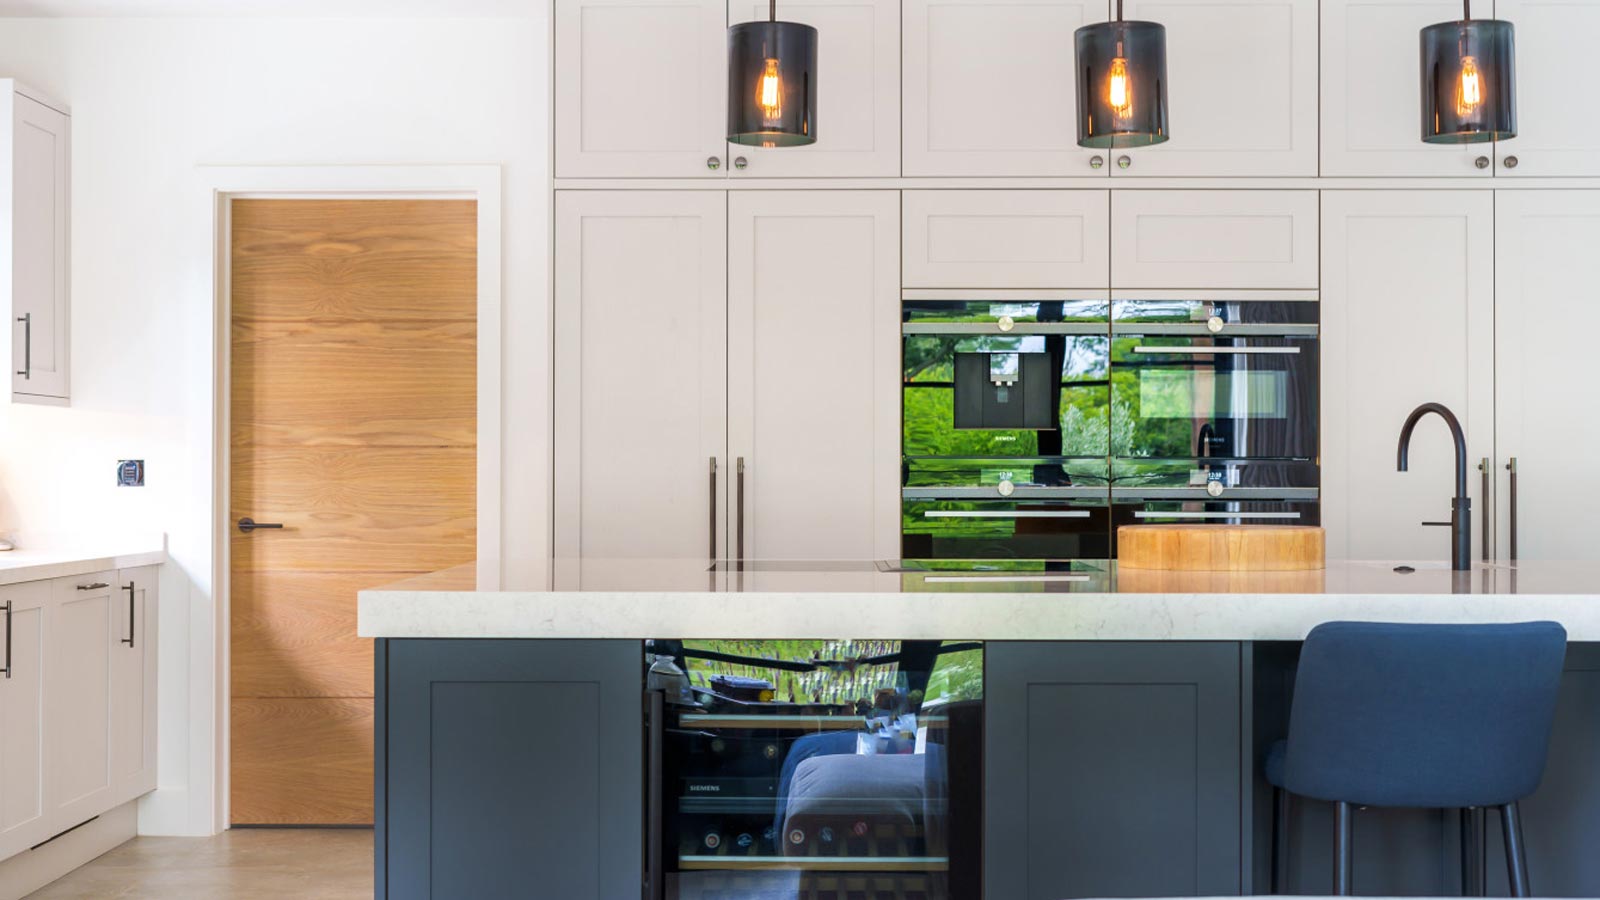 A modern cashmere kitchen created from a Shaker cashmere kitchen